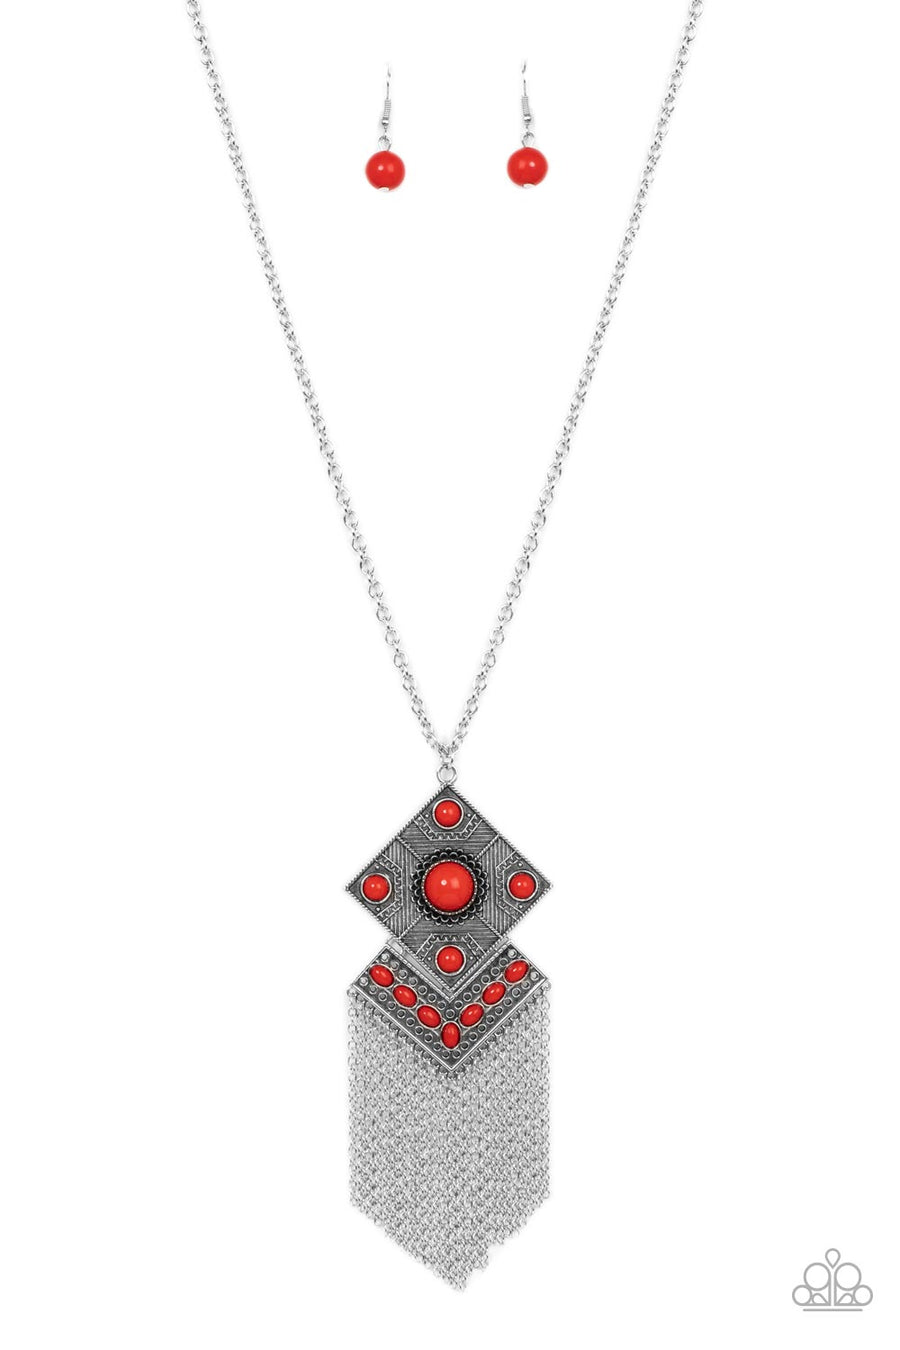 Kite Flight - Red Necklace - Paparazzi Accessories - A curtain of silver chains stream out from the bottom of stacked silver frames embellished in bubbly red beads and antiqued silver textures, resulting in a whimsical kite shaped pendant at the bottom of an extended silver chain.